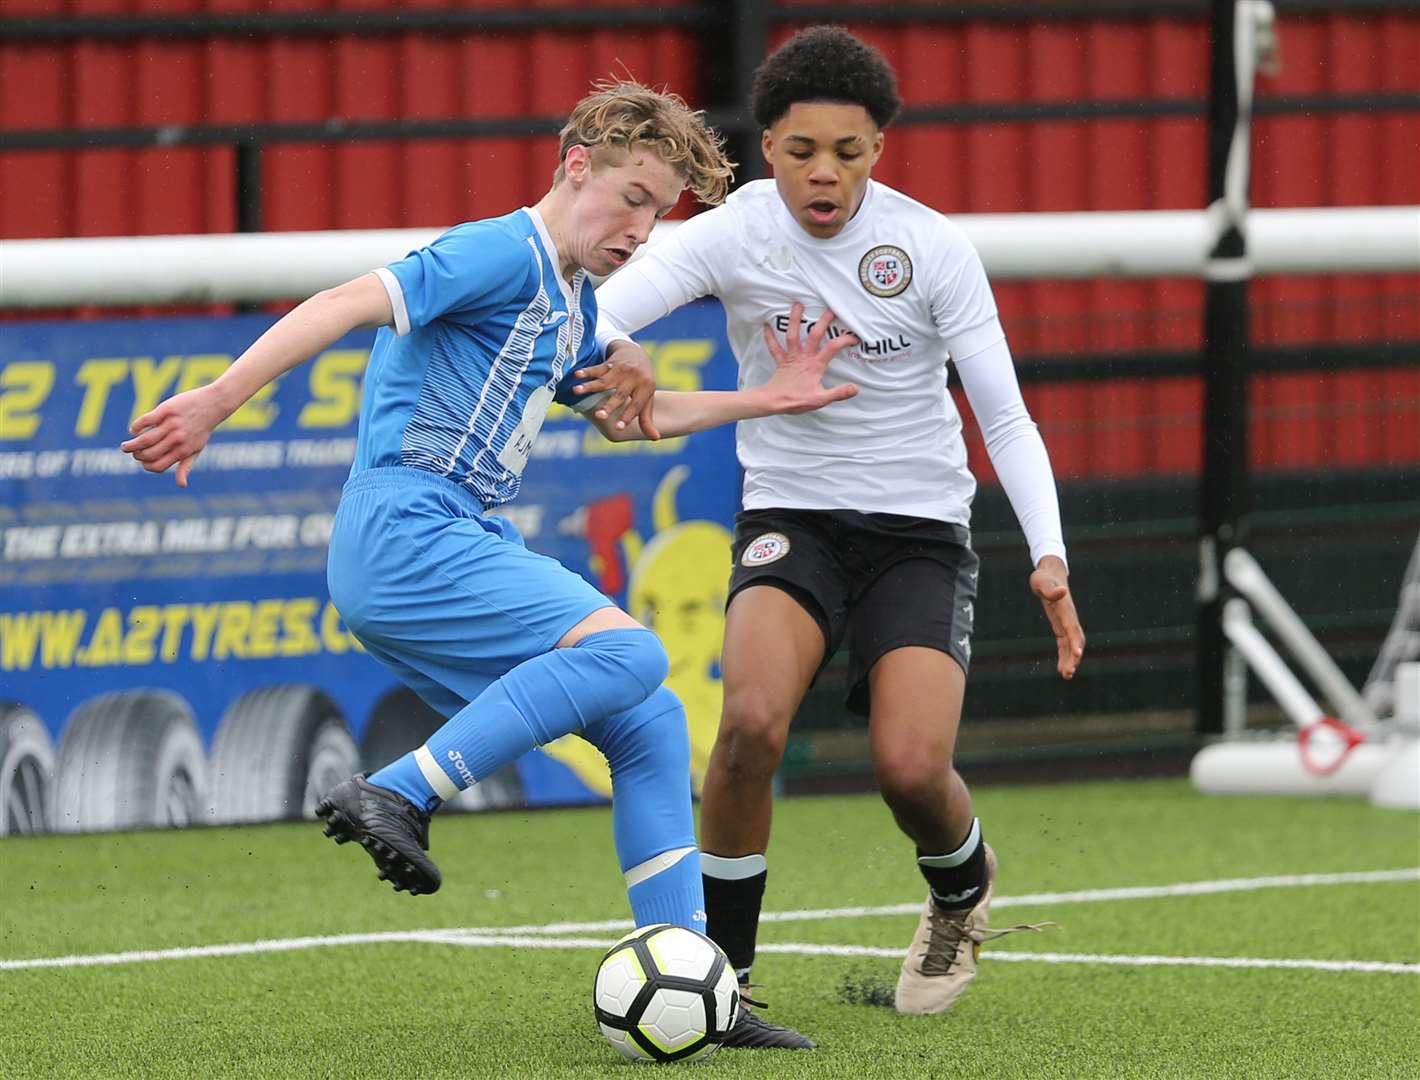 Bromley (white) up against Metrogas in the Kent Merit Under-14 Boys Cup Final. Picture: PSP Images